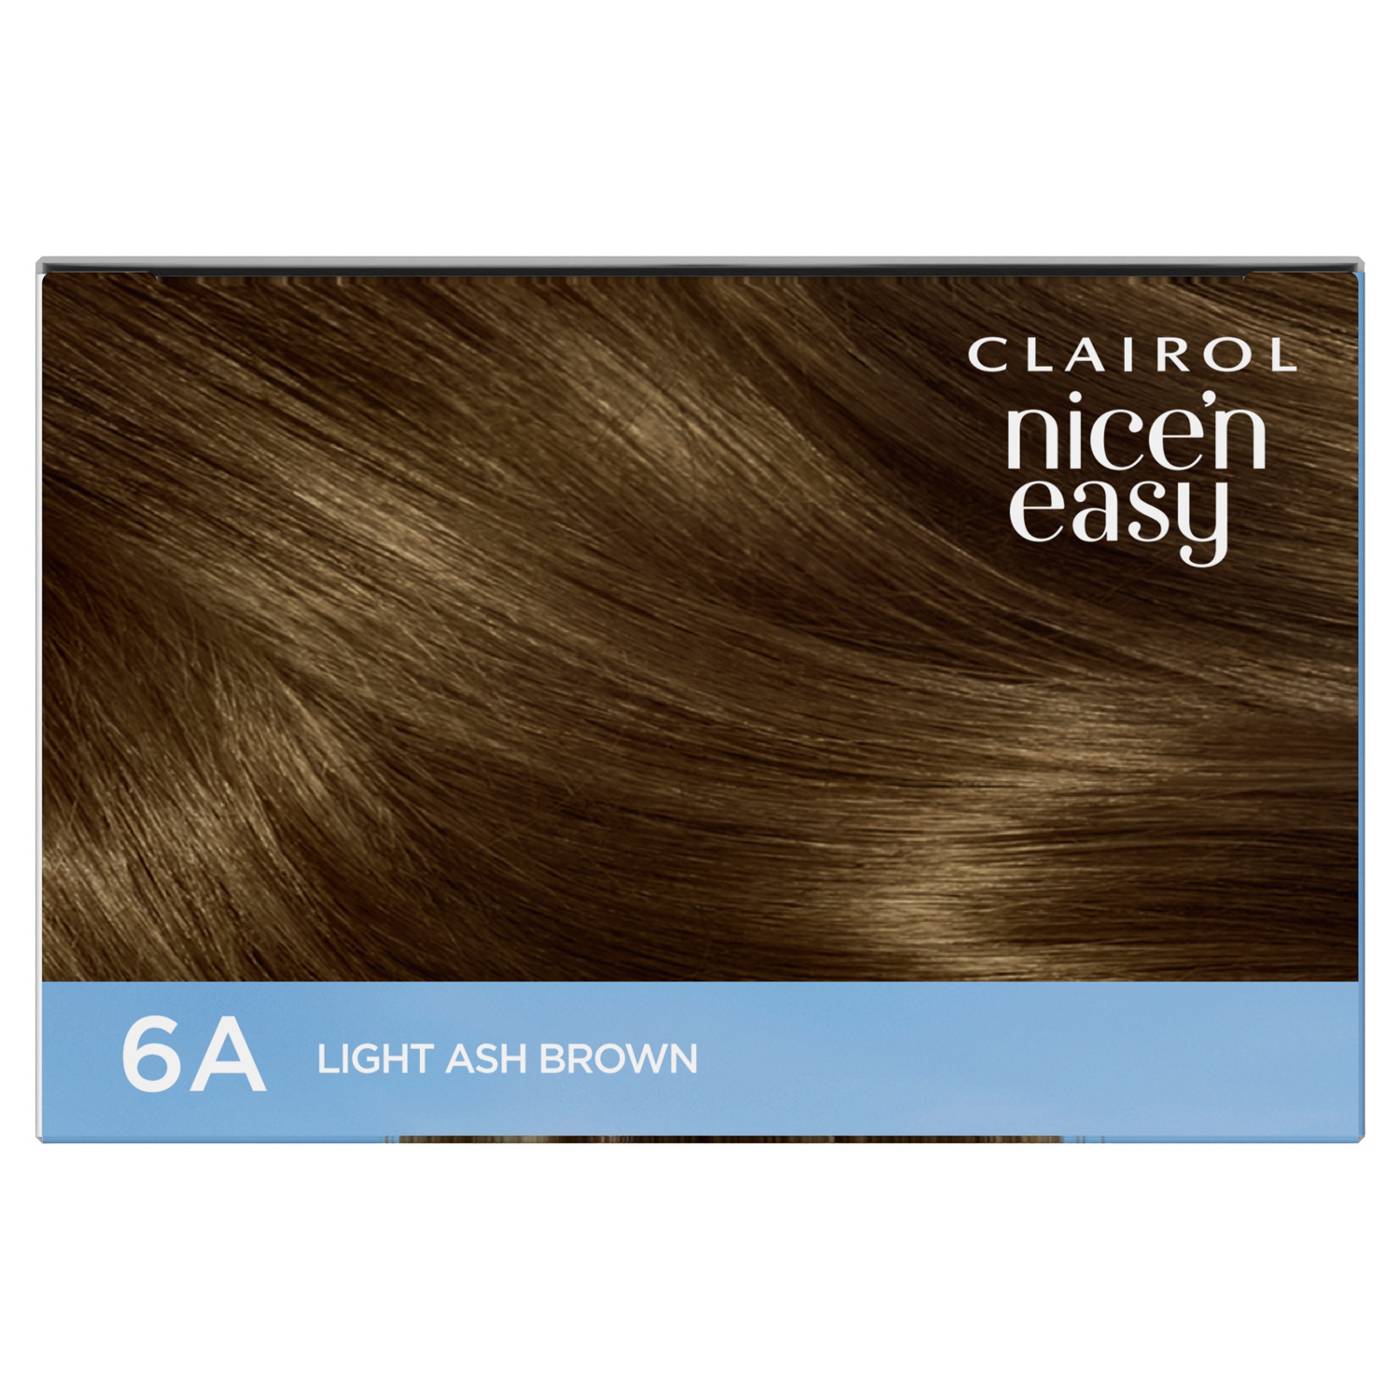 Clairol Nice 'N Easy Permanent Hair Color - 6A Light Ash Brown; image 9 of 10